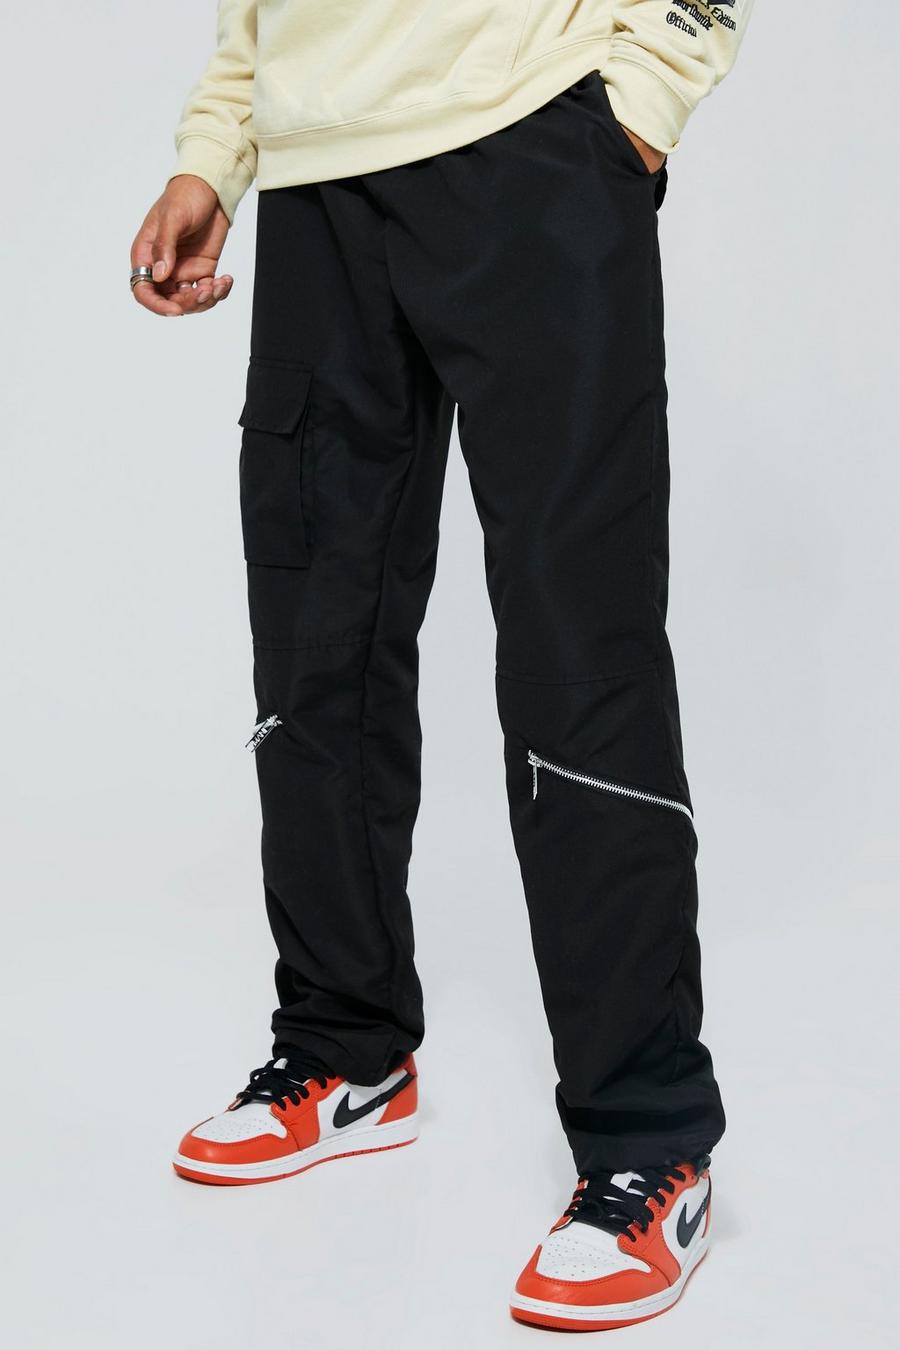 Mens Tall Trousers | Trousers For Tall Men | boohoo UK